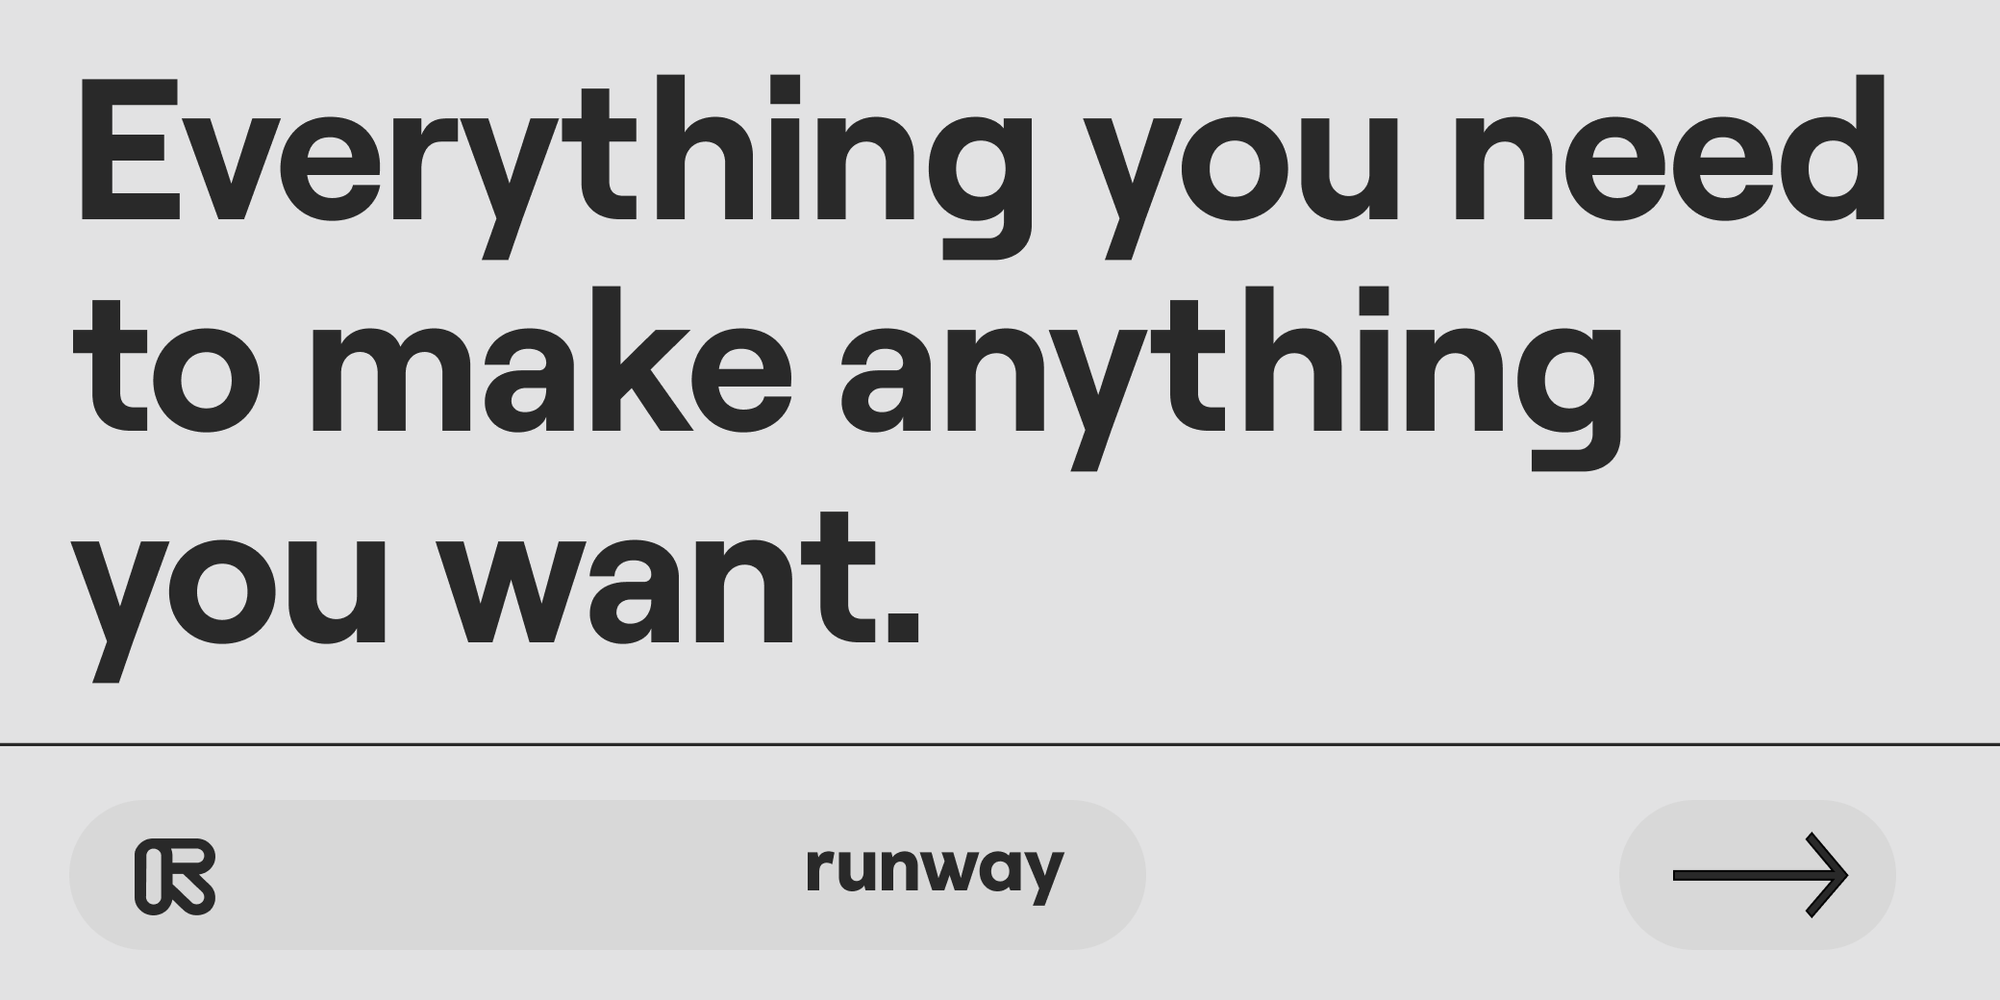 Runway - Everything you need to make anything you want.